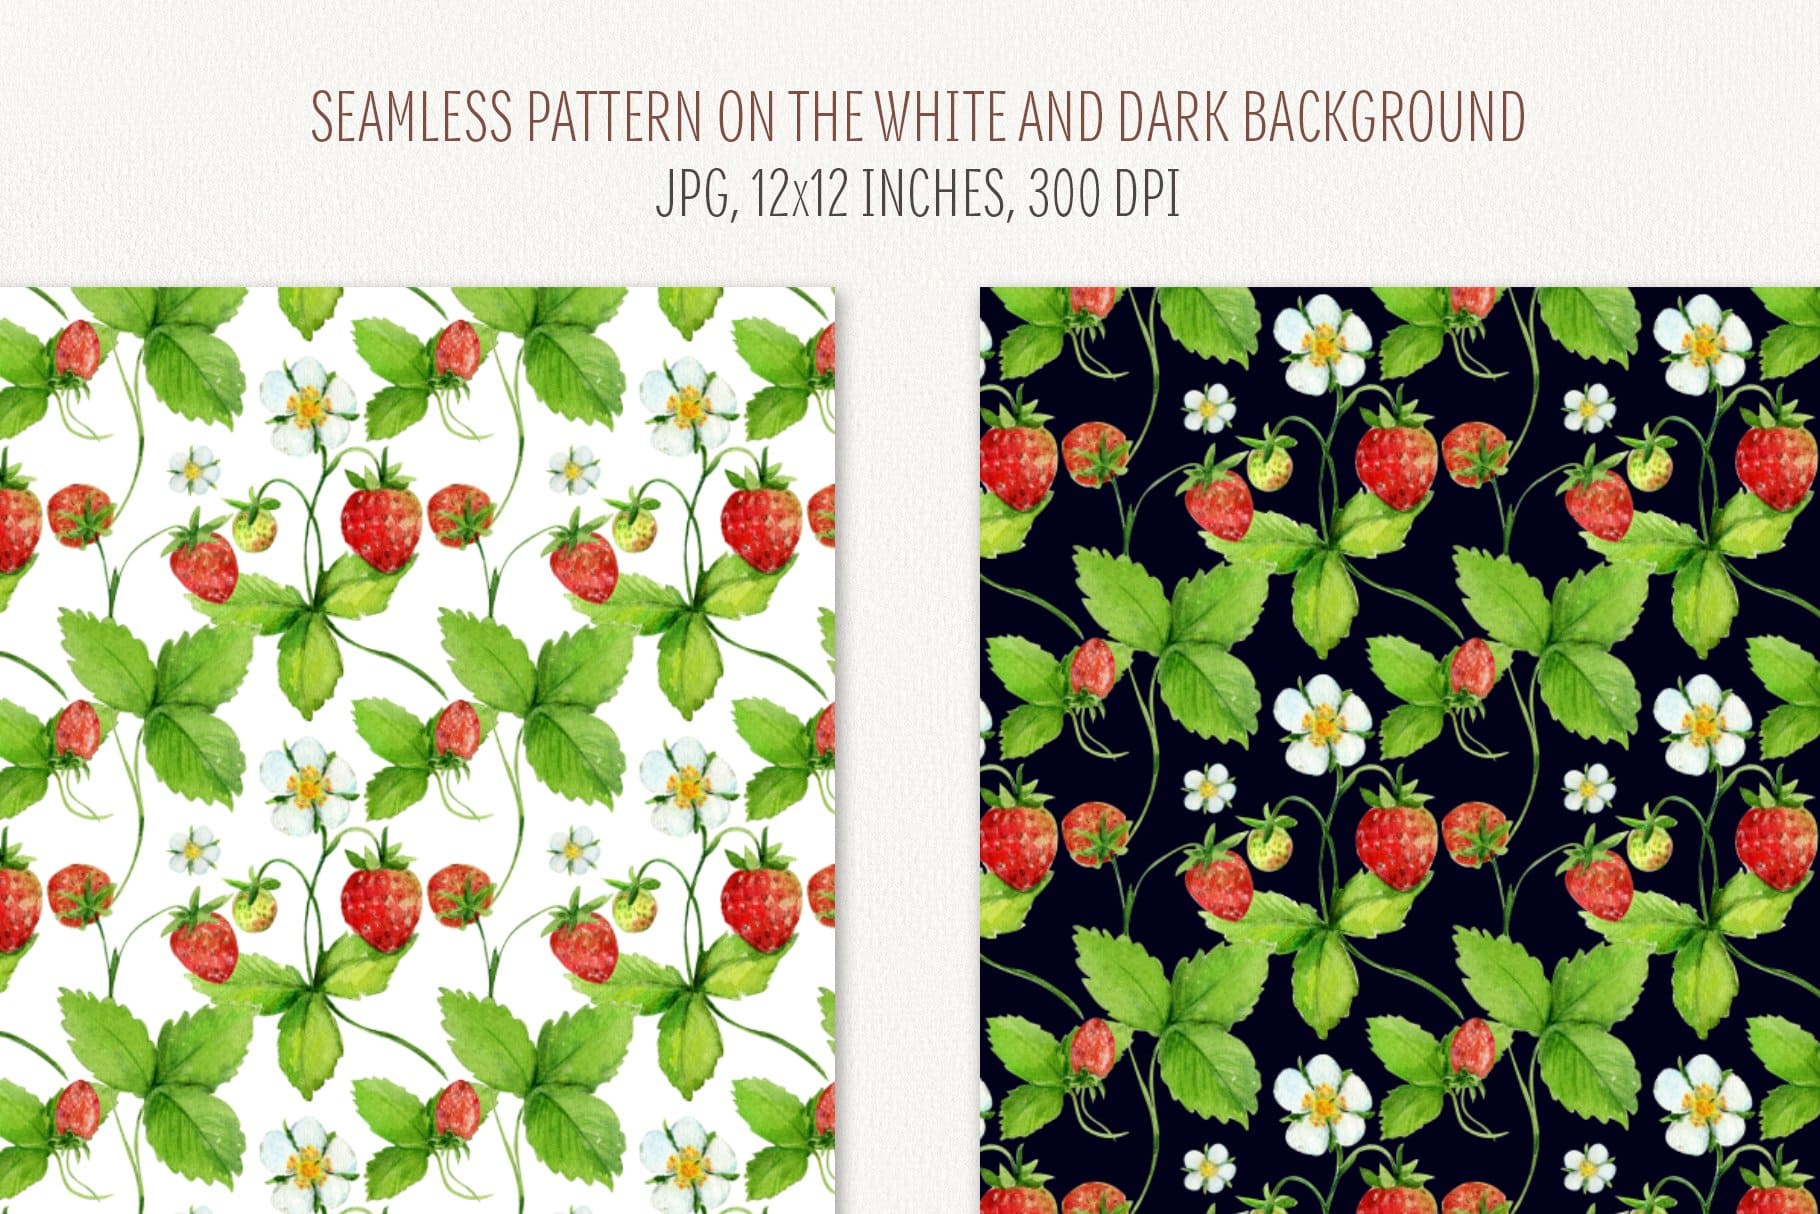 Bright strawberry pattern on white and black backgrounds.